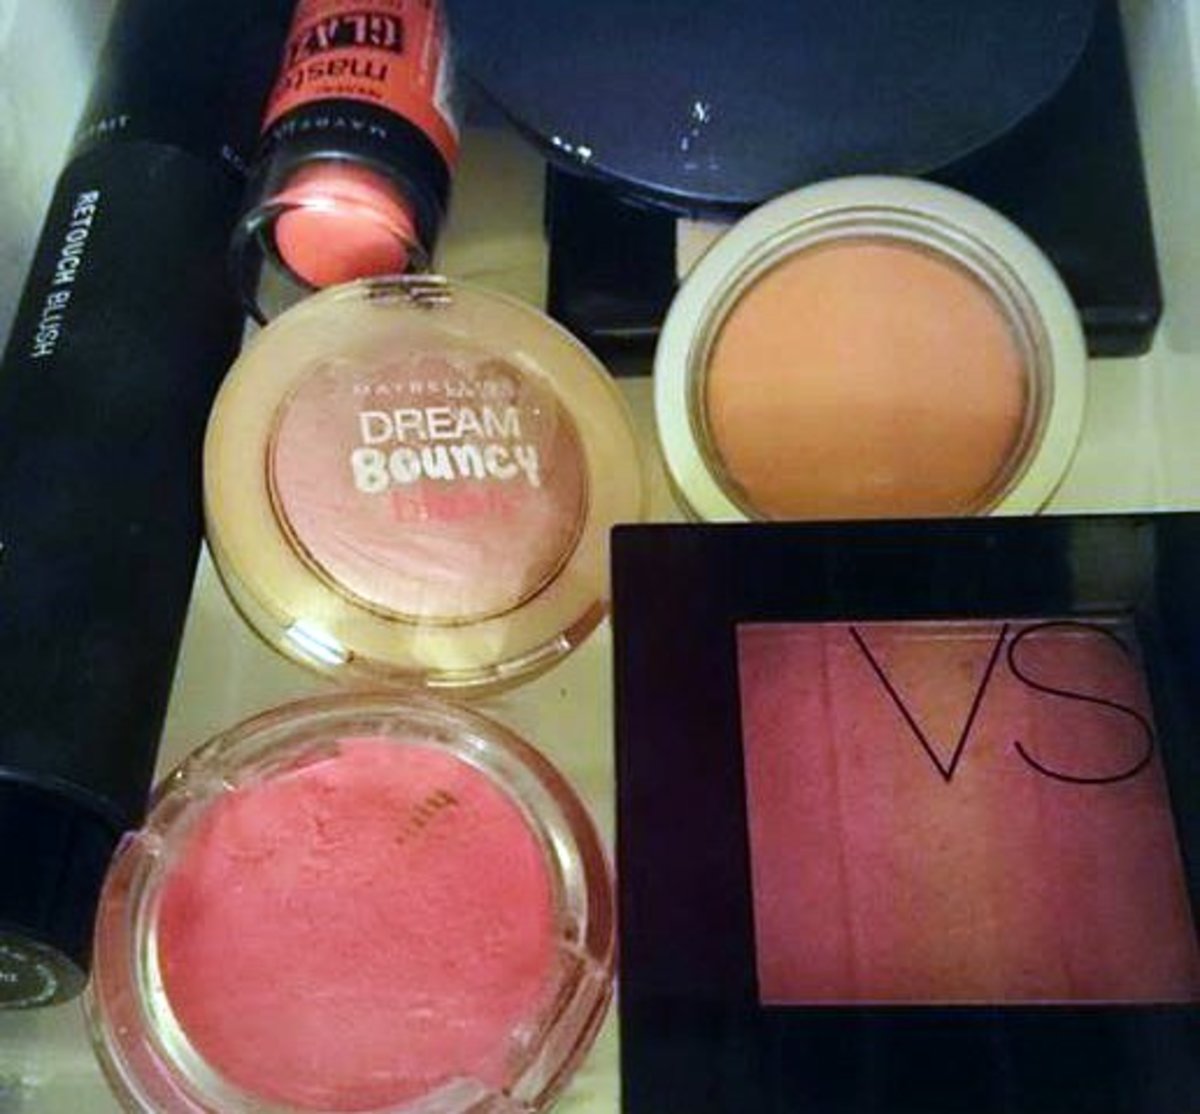 Be careful with your blush. Sheer out dark colors if you need to, blend blend blend!